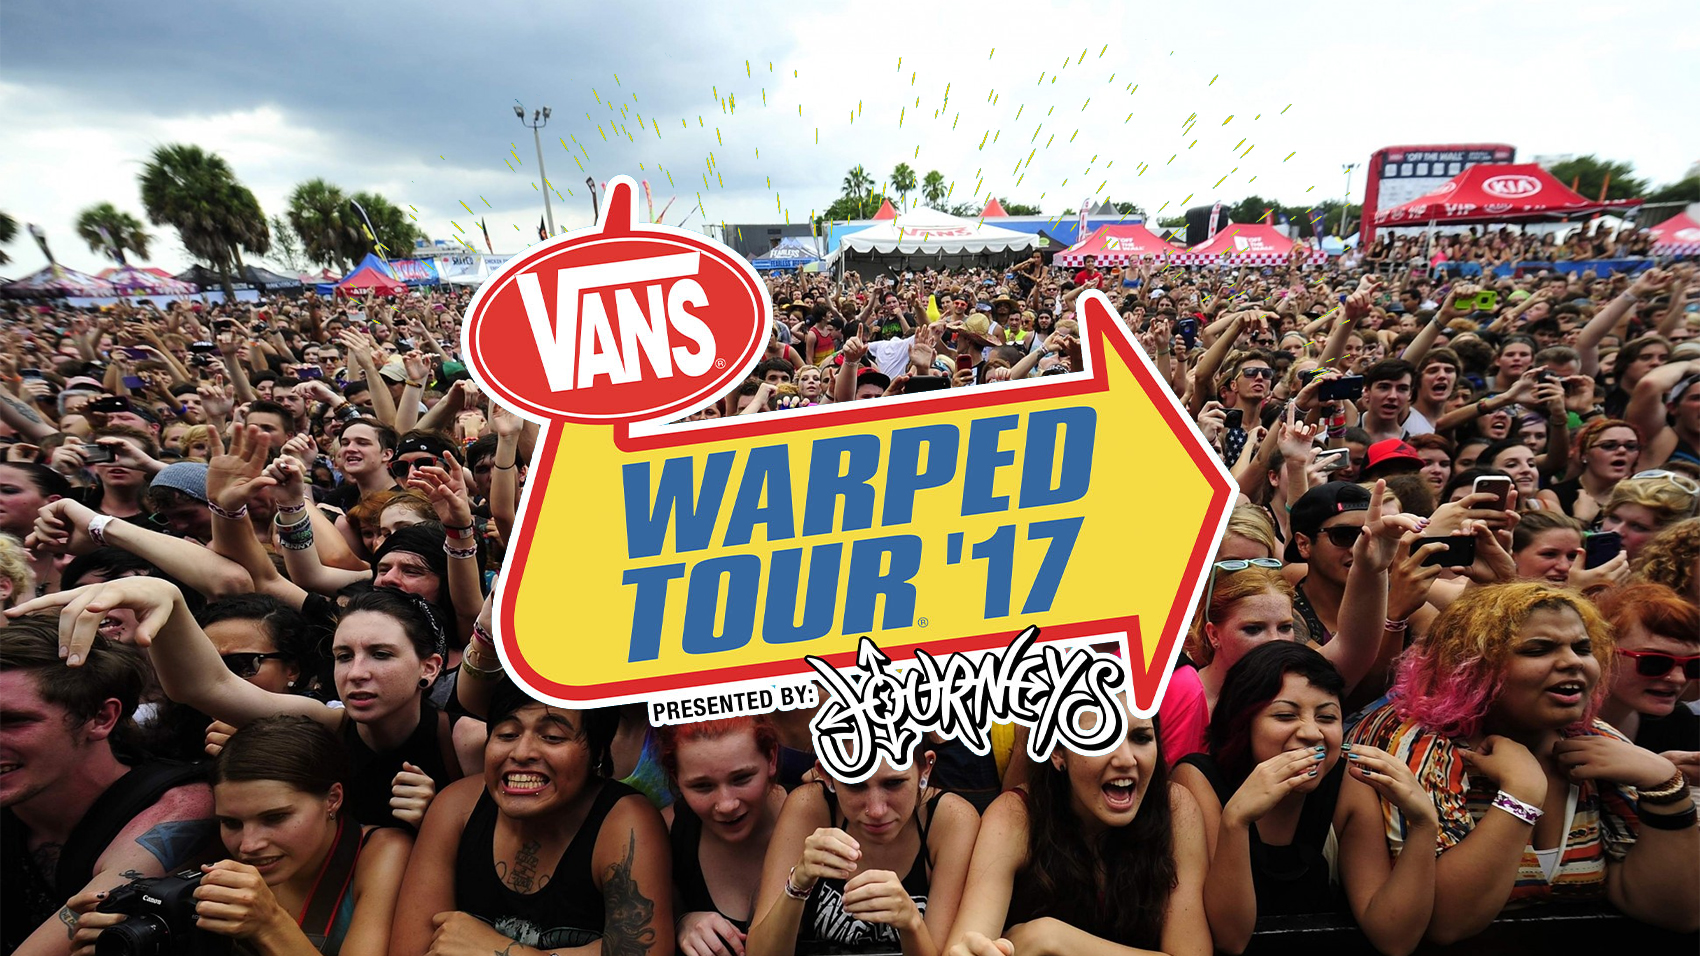 2018 Will Be The Final Year For Vans Warped Tour